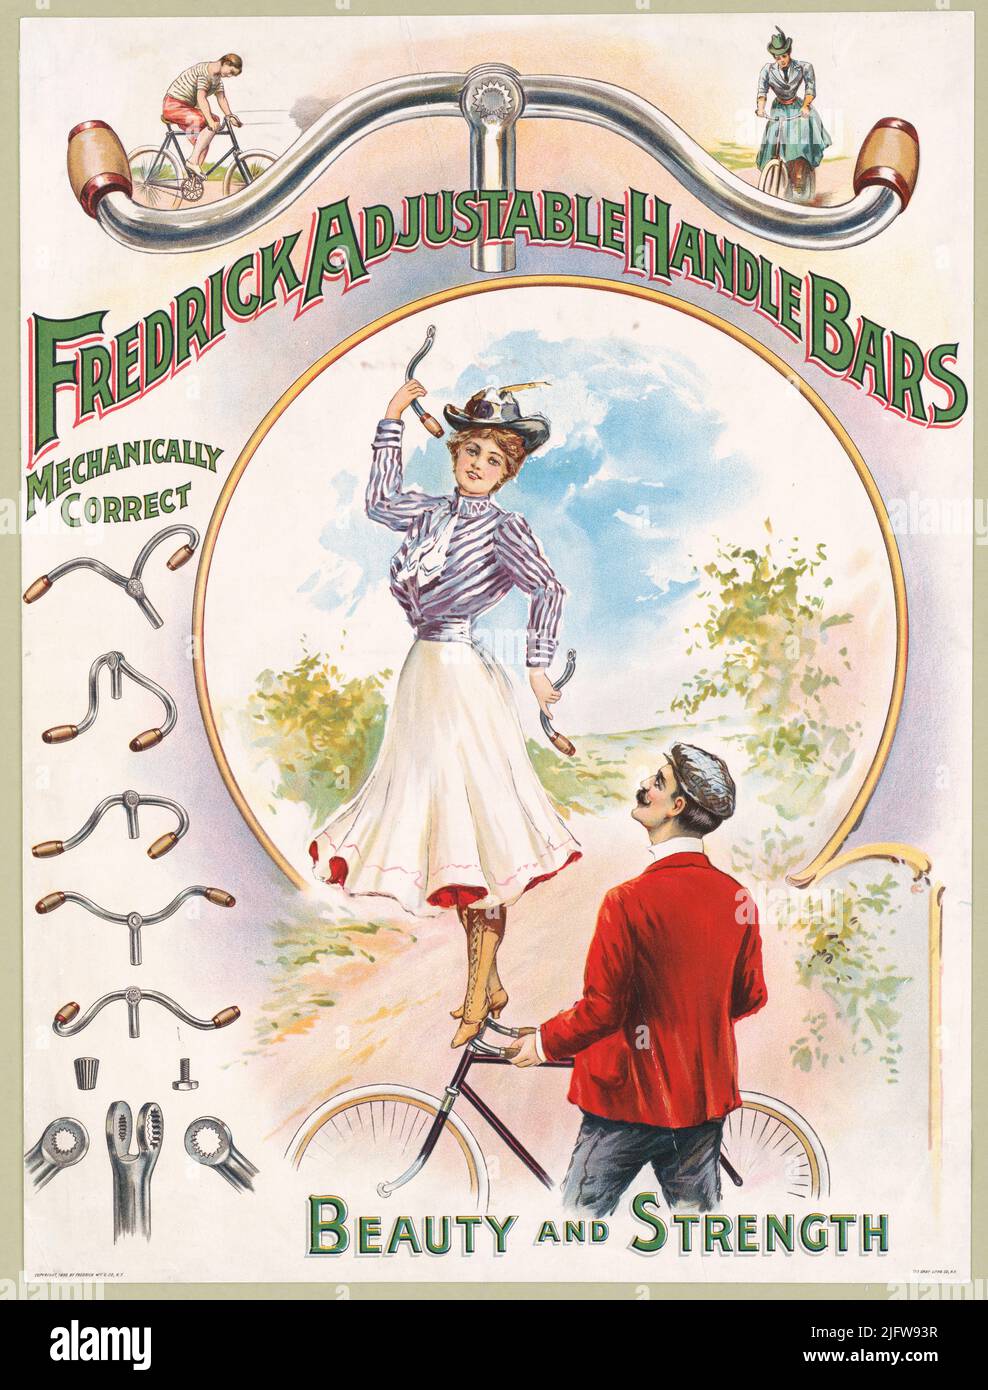 19th century ad for Frederick adjustable bicycle handle bars, mechanically correct, beauty and strength. Lithograph by Gray Litho. Co Stock Photo